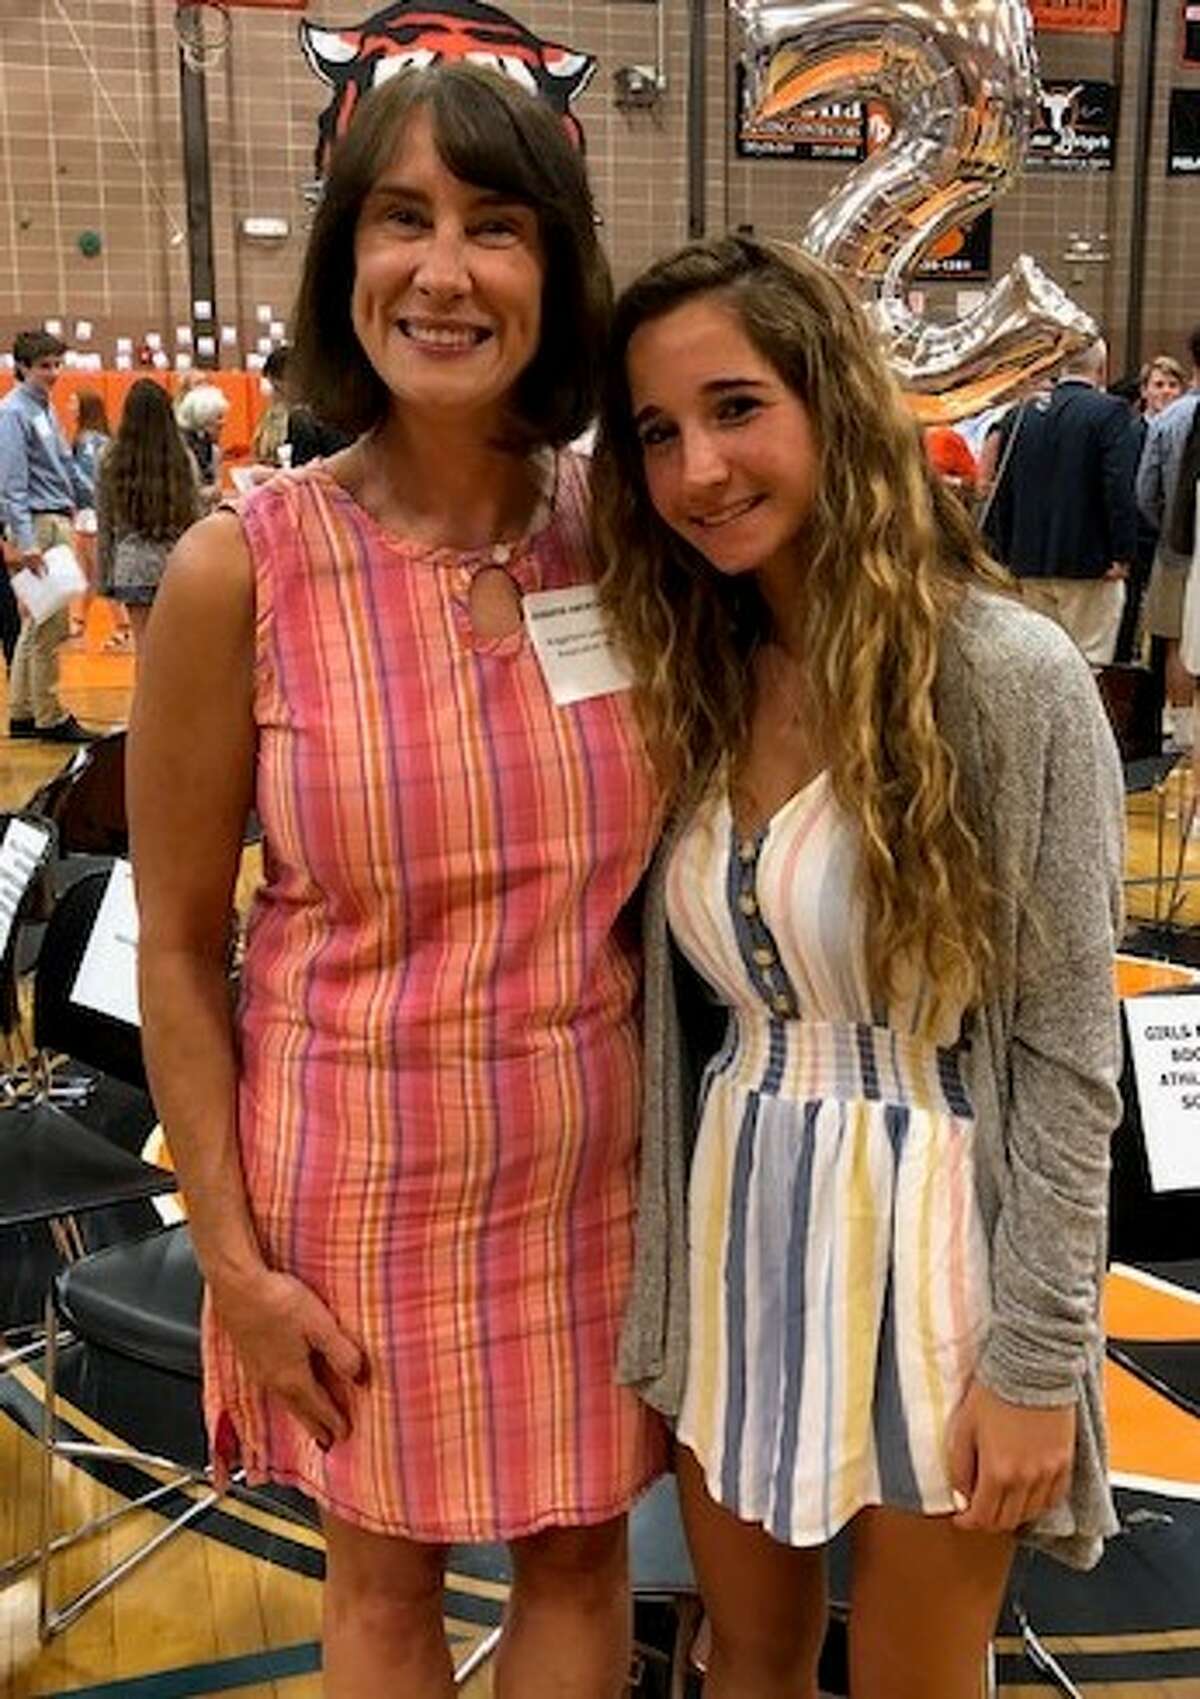 At the Ridgefield High School Class of 2019 senior scholarship ceremony on June 4, Alyssa Maiolo received the inaugural Ridgefield Ladies Golf Association award. Alyssa, a member of the RHS golf team will be attending Loyola University in the fall. She posed with RLGA member Jennifer Abercrombie for a photo at the ceremony.